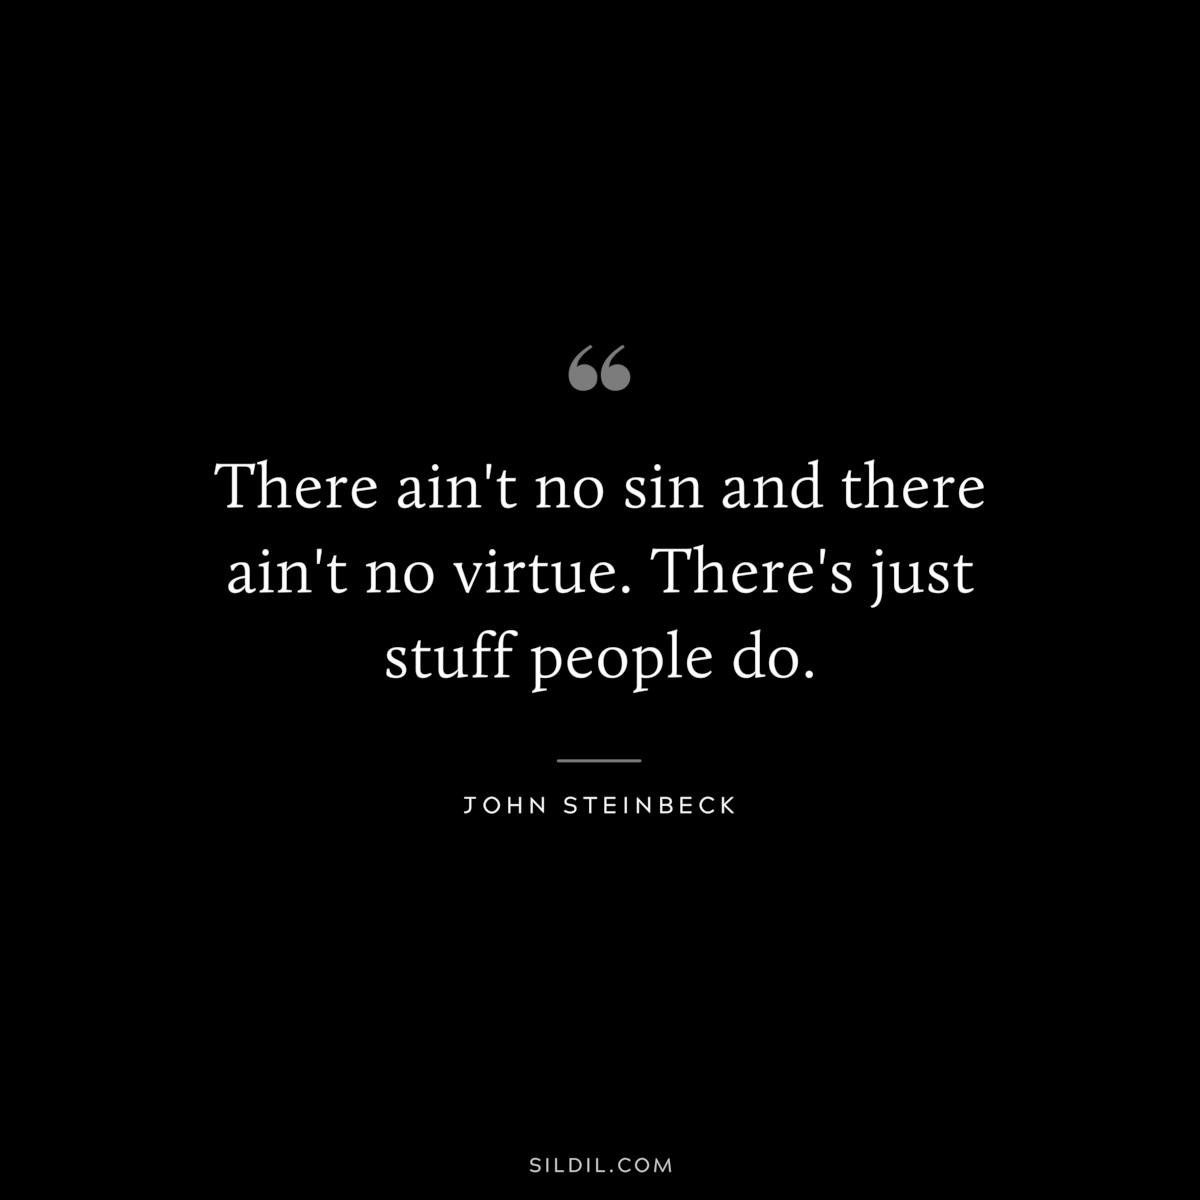 There ain't no sin and there ain't no virtue. There's just stuff people do.― John Steinbeck